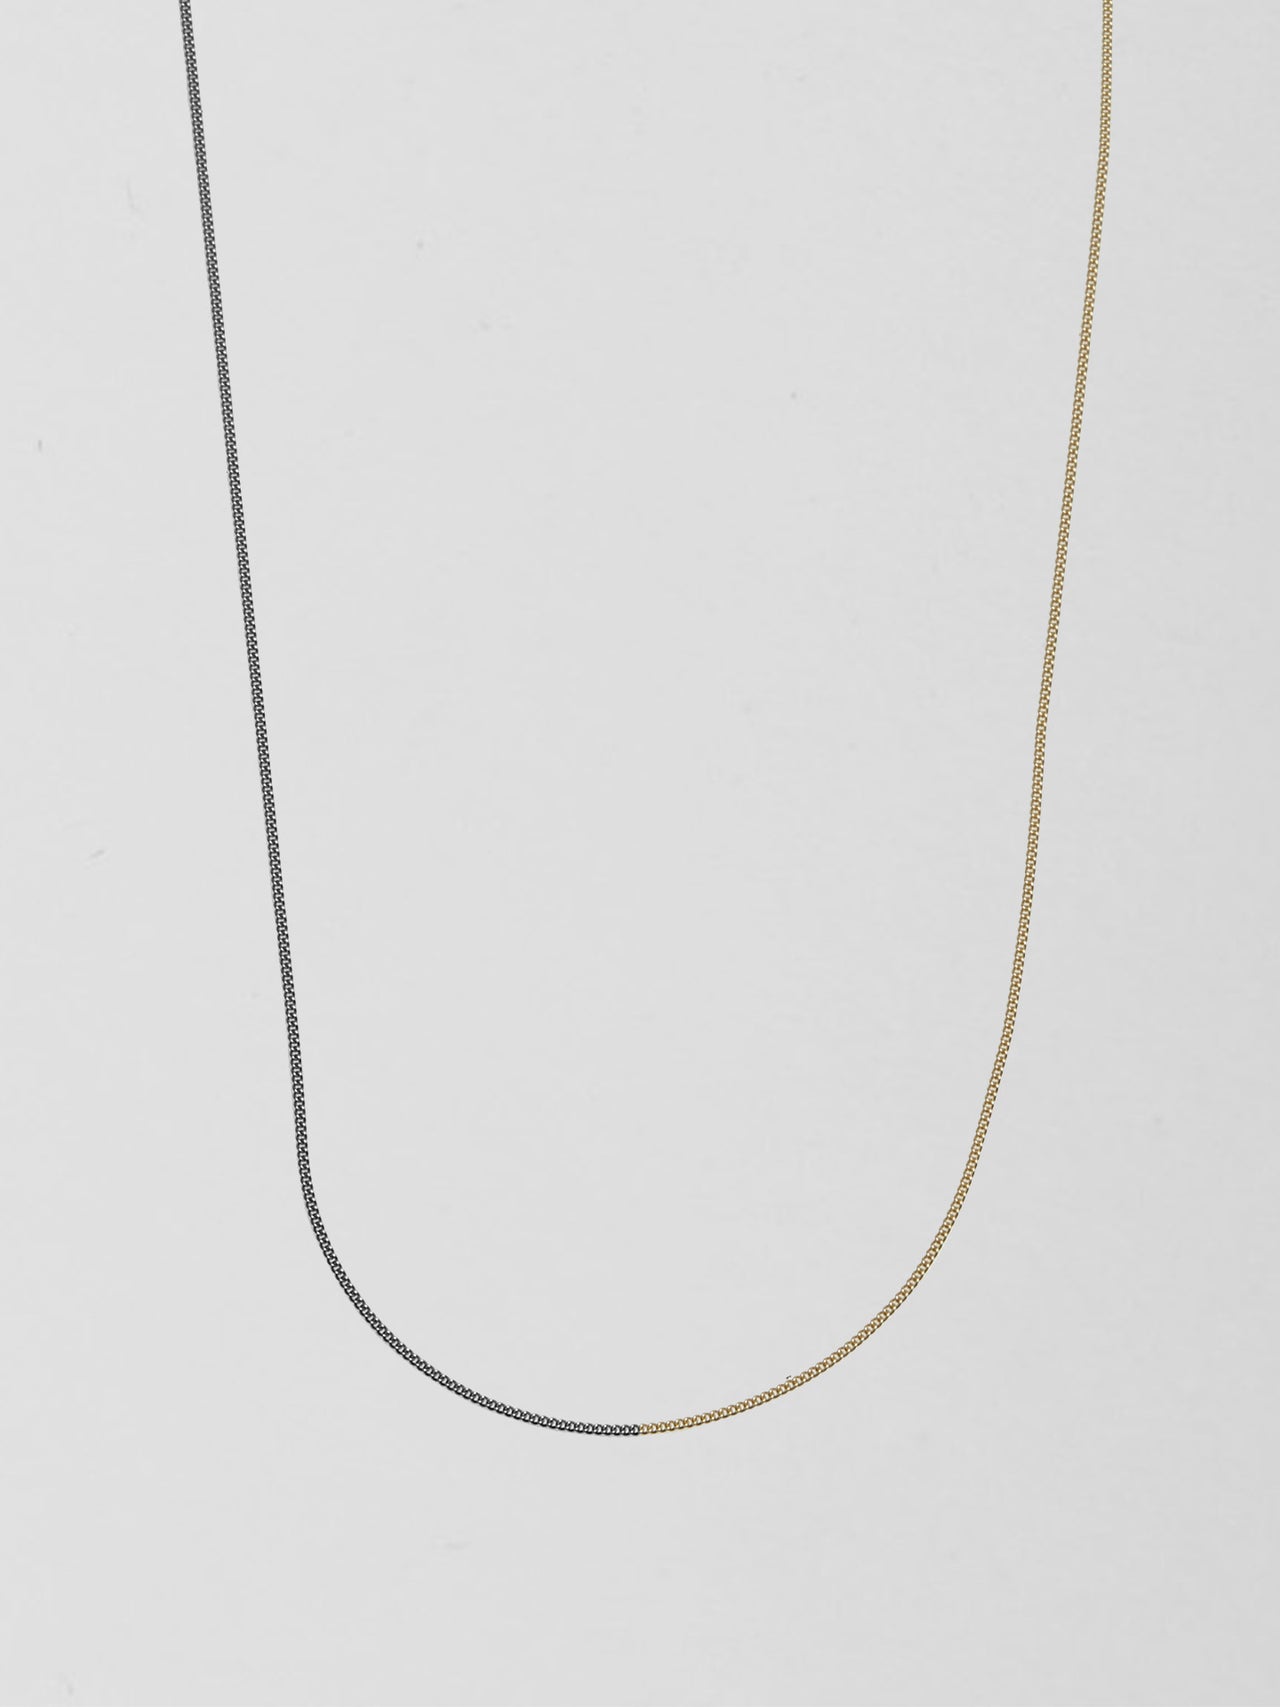 Half 14kt Yellow Gold & Half Oxidized Sterling Silver Curb Chain Necklace pictured on light grey background.